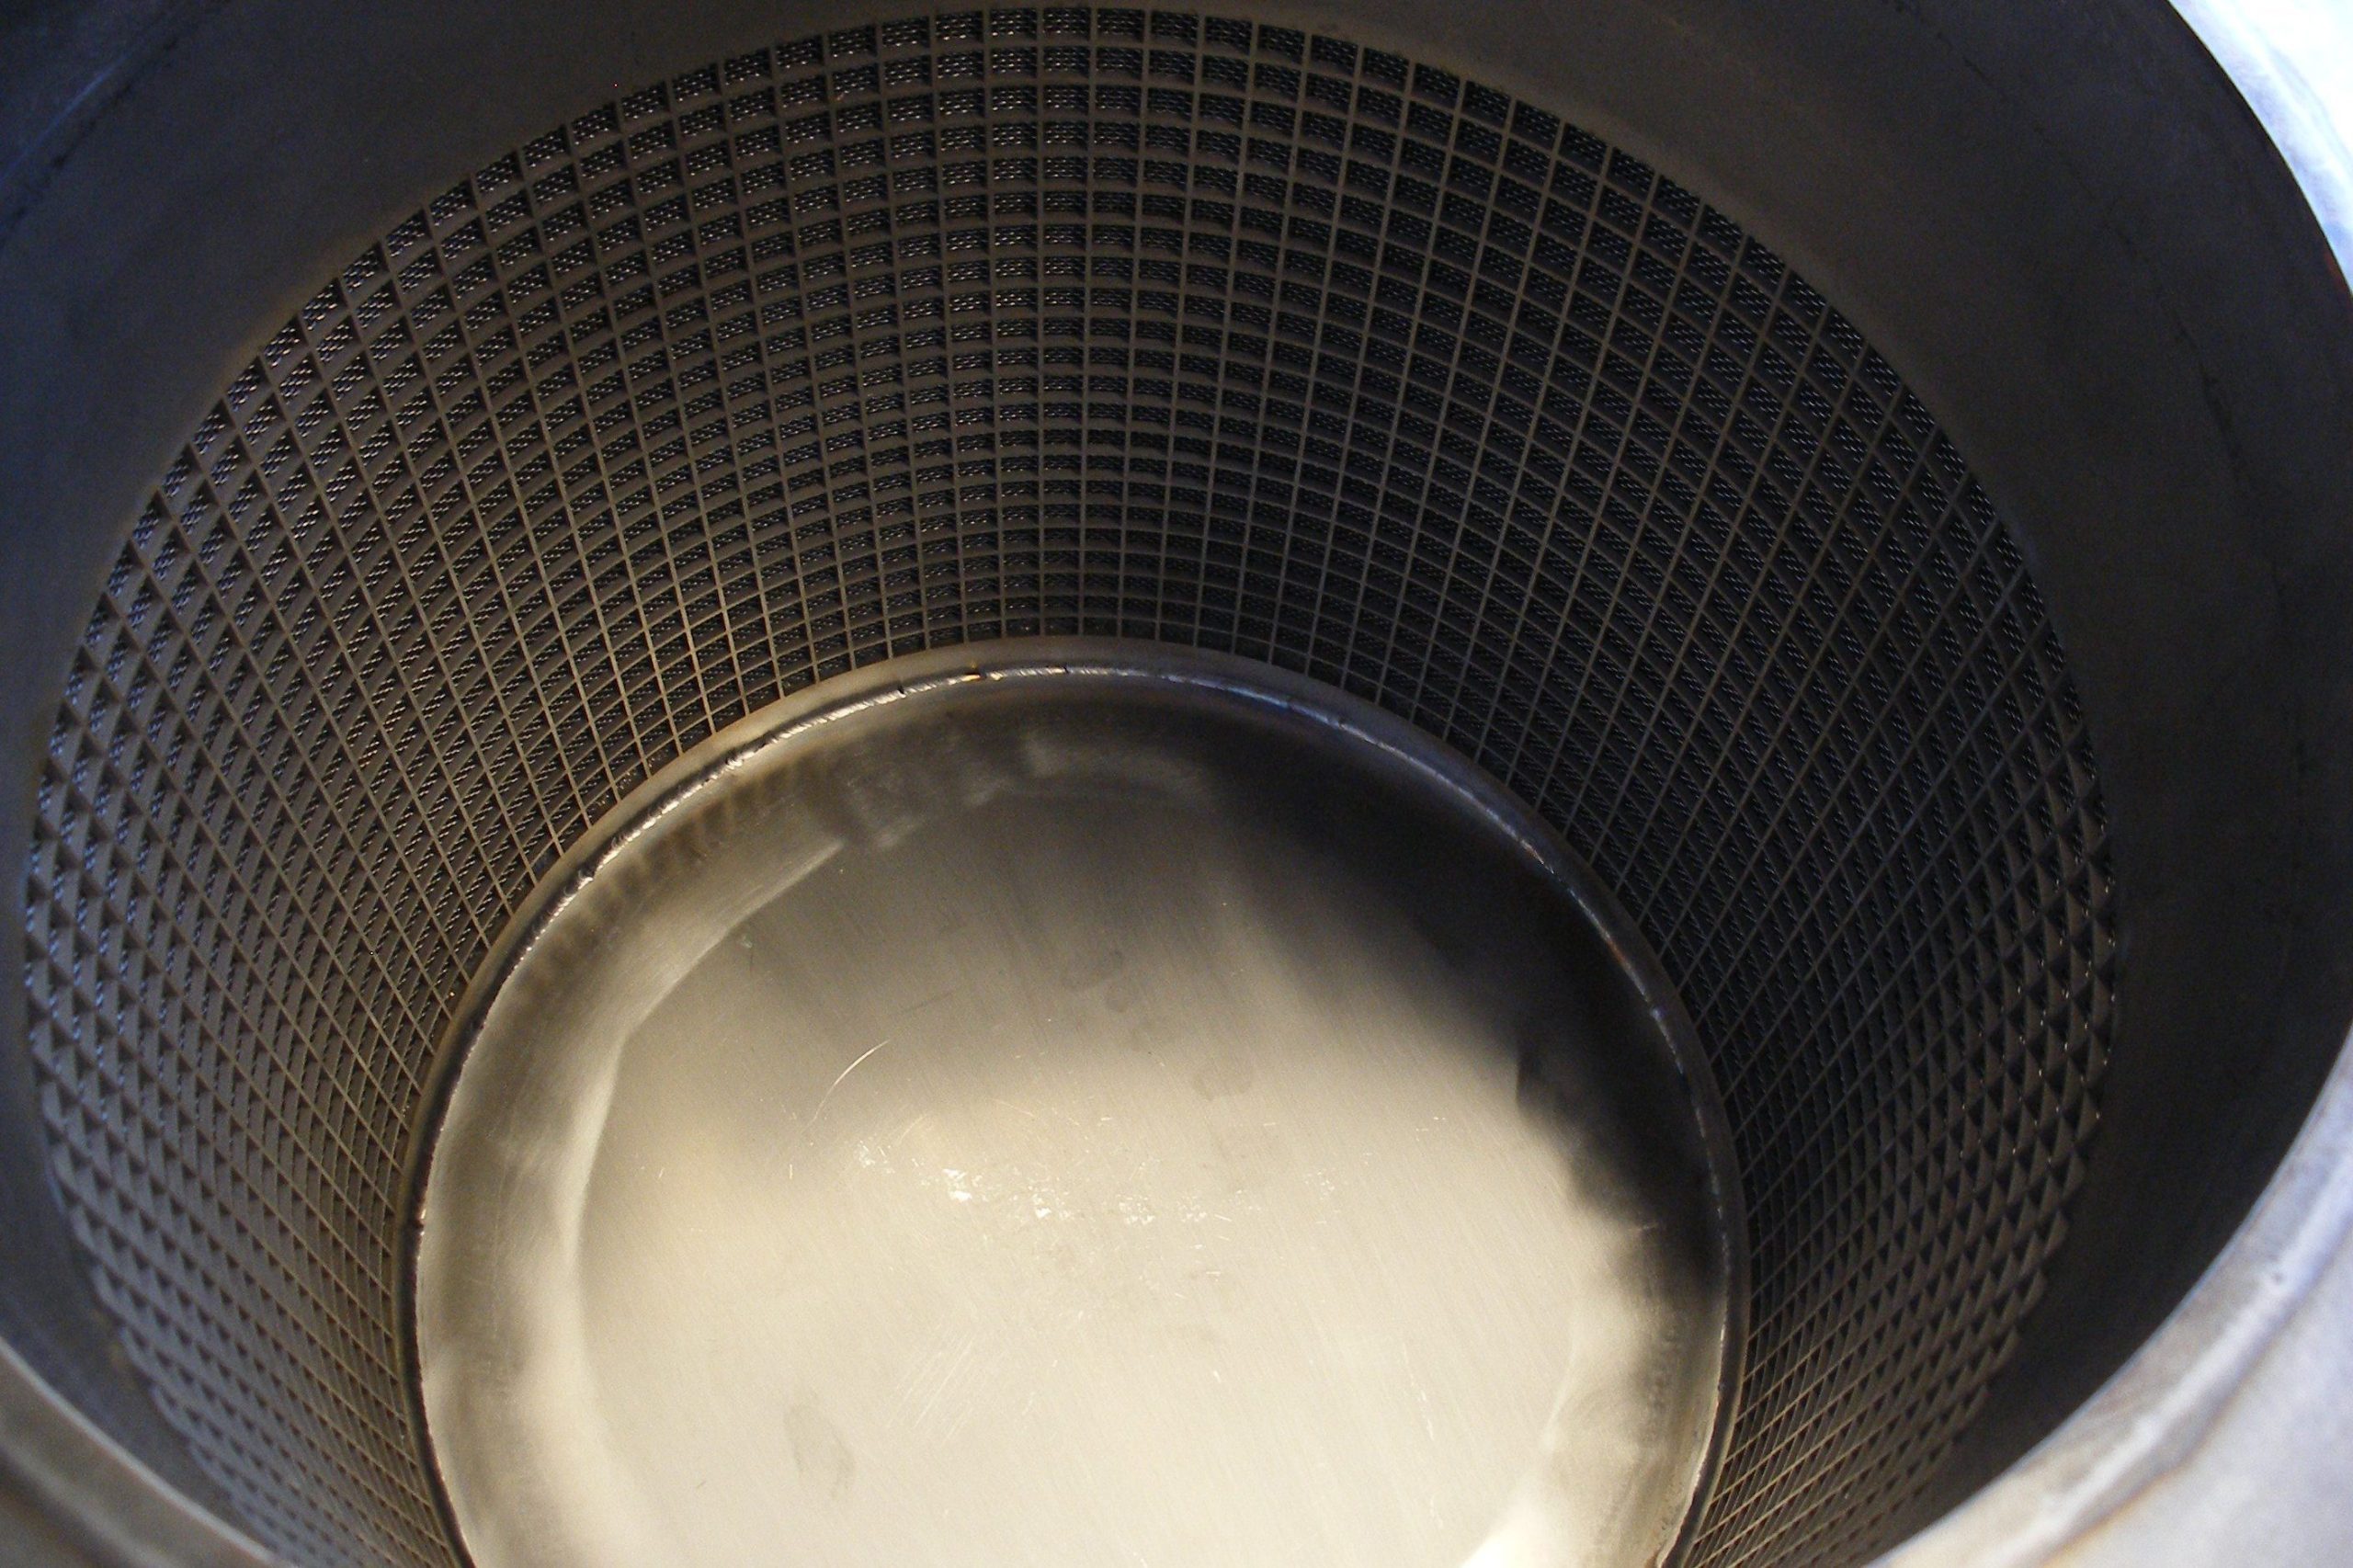 A close-up of a metal perforated strainer.